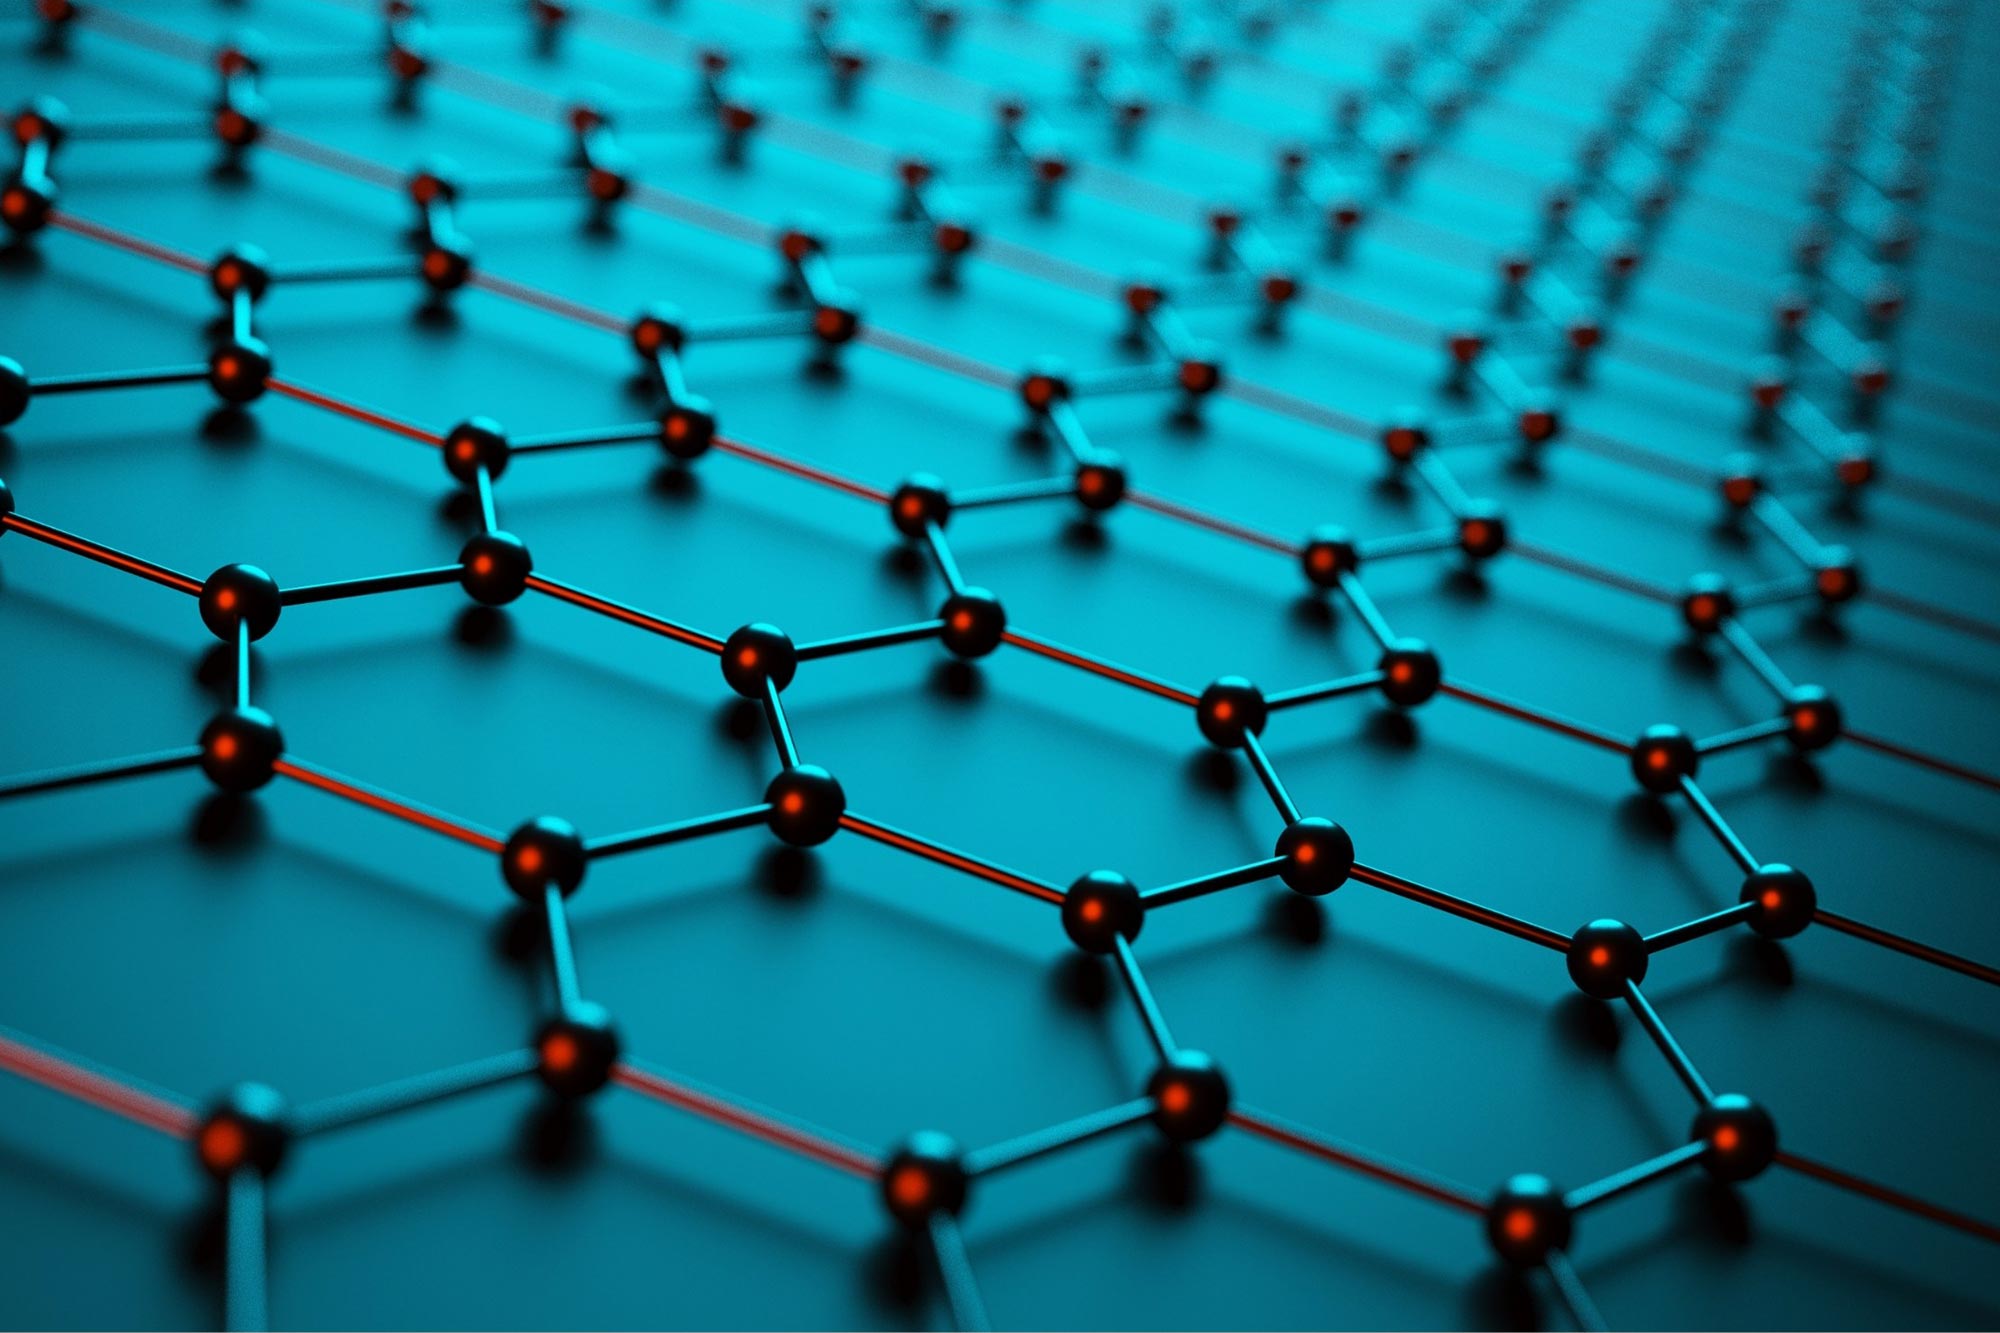 Unexpected Findings – Graphene Grows, and We Can See It